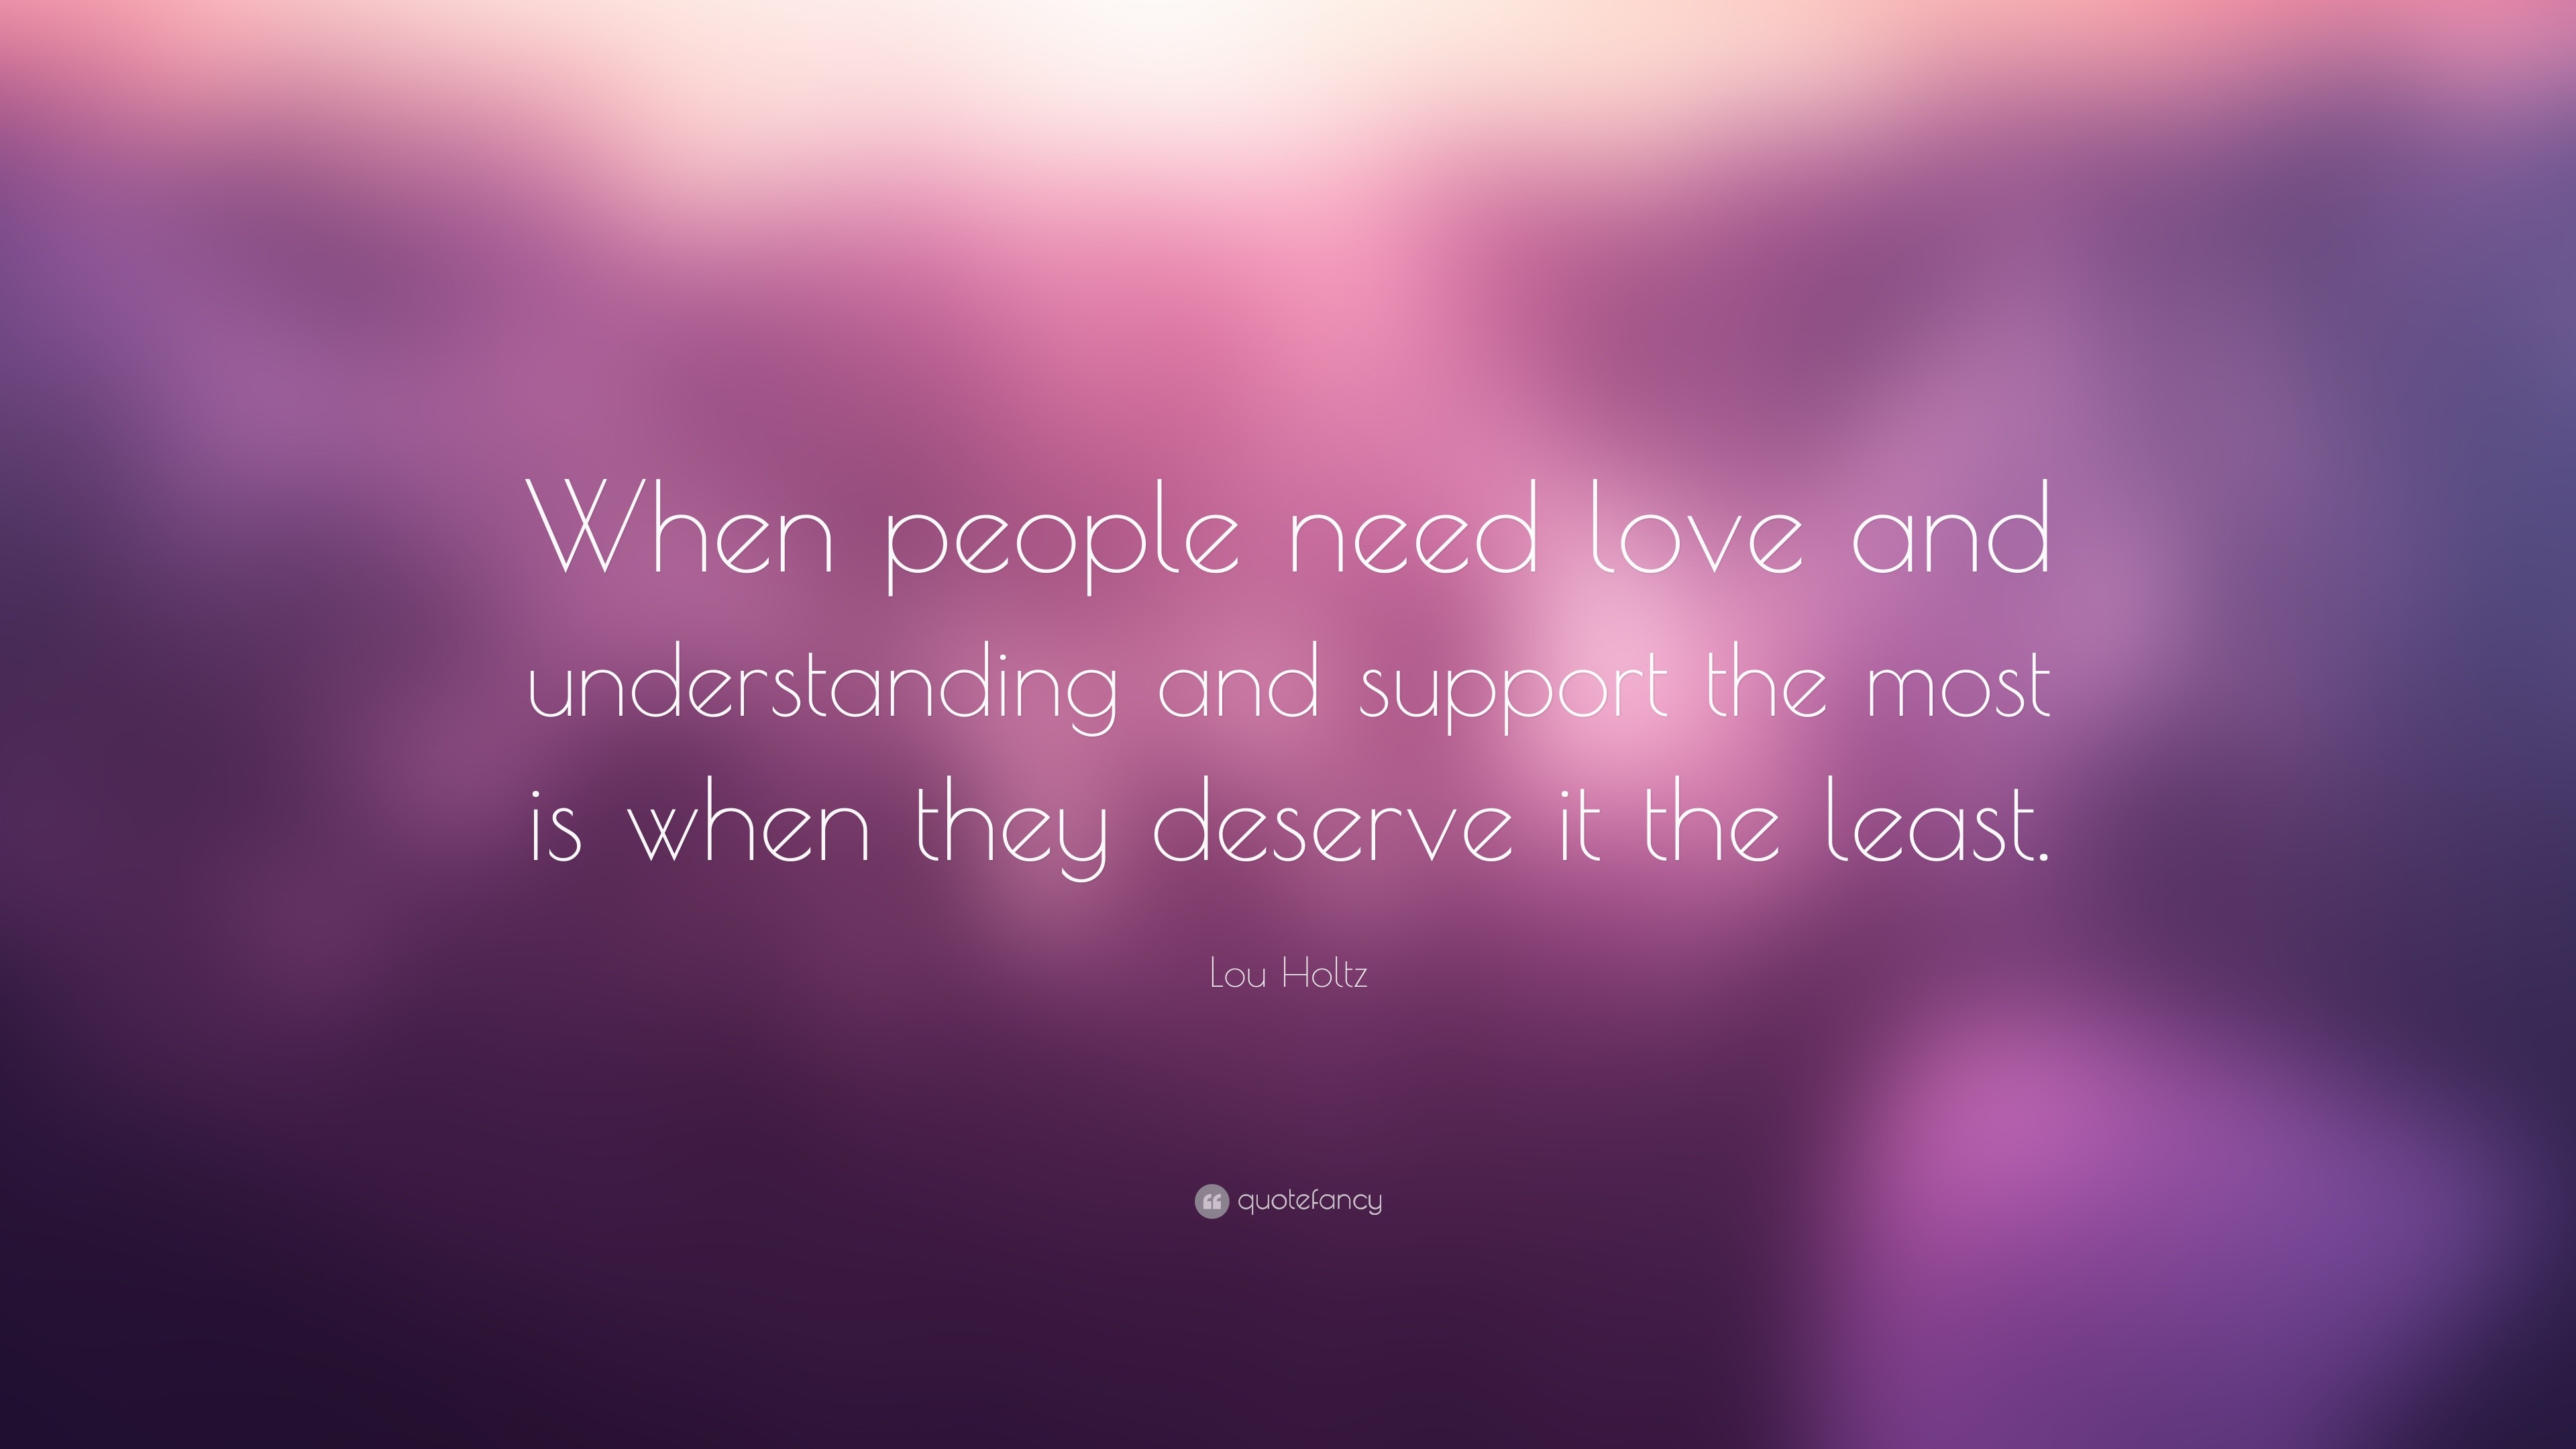 Lou Holtz Quote: “When people need love and understanding and support ...